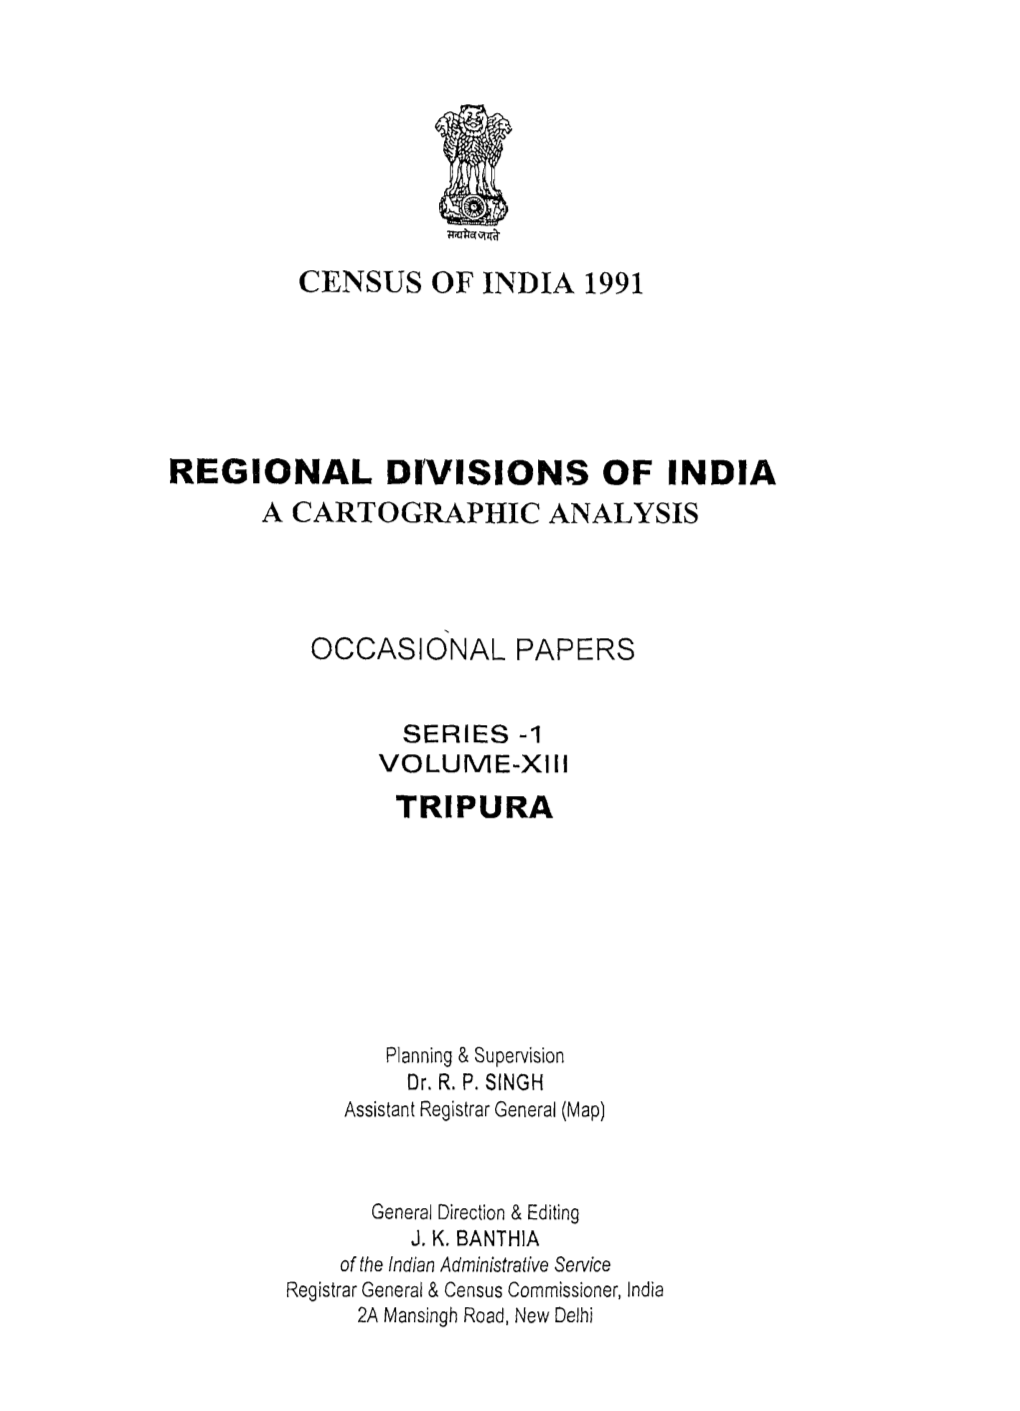 Regional Divisions of India a Cartographic Analysis,Vol-XIII